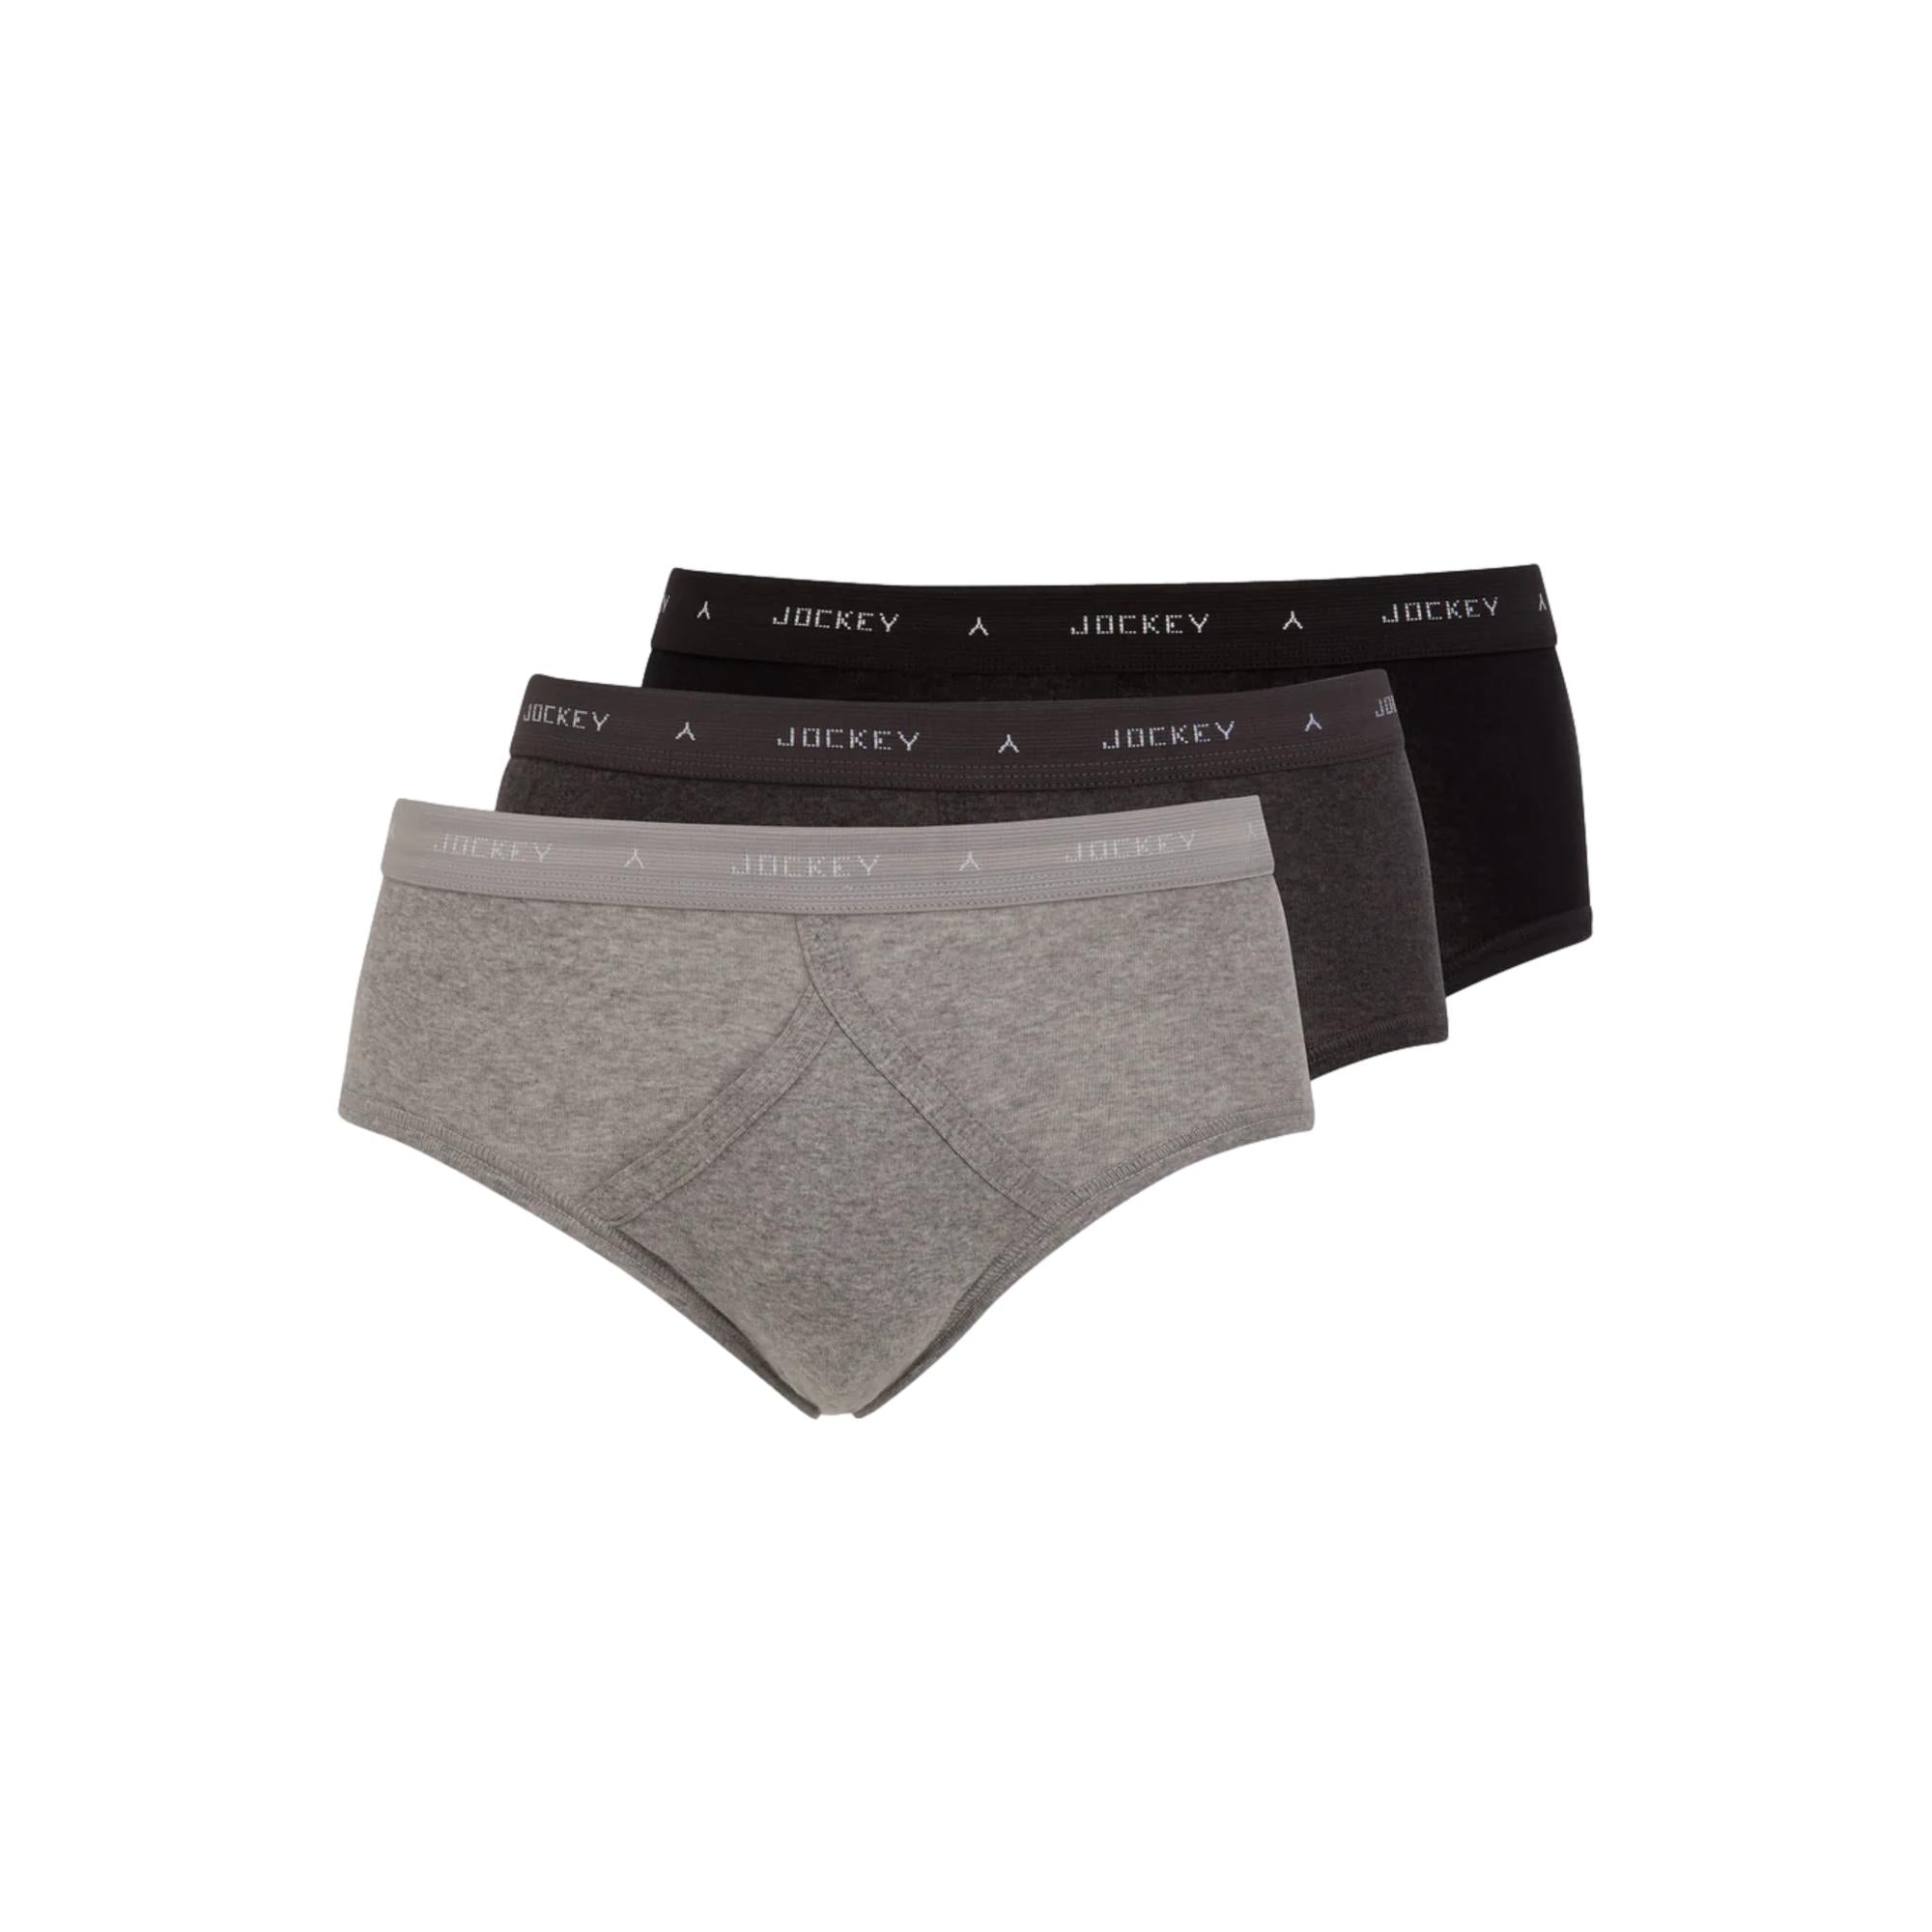 Jockey Men's Briefs, 3 Pack + 1 Free, 100% Cotton, All Day Comfort, Shop  Today. Get it Tomorrow!